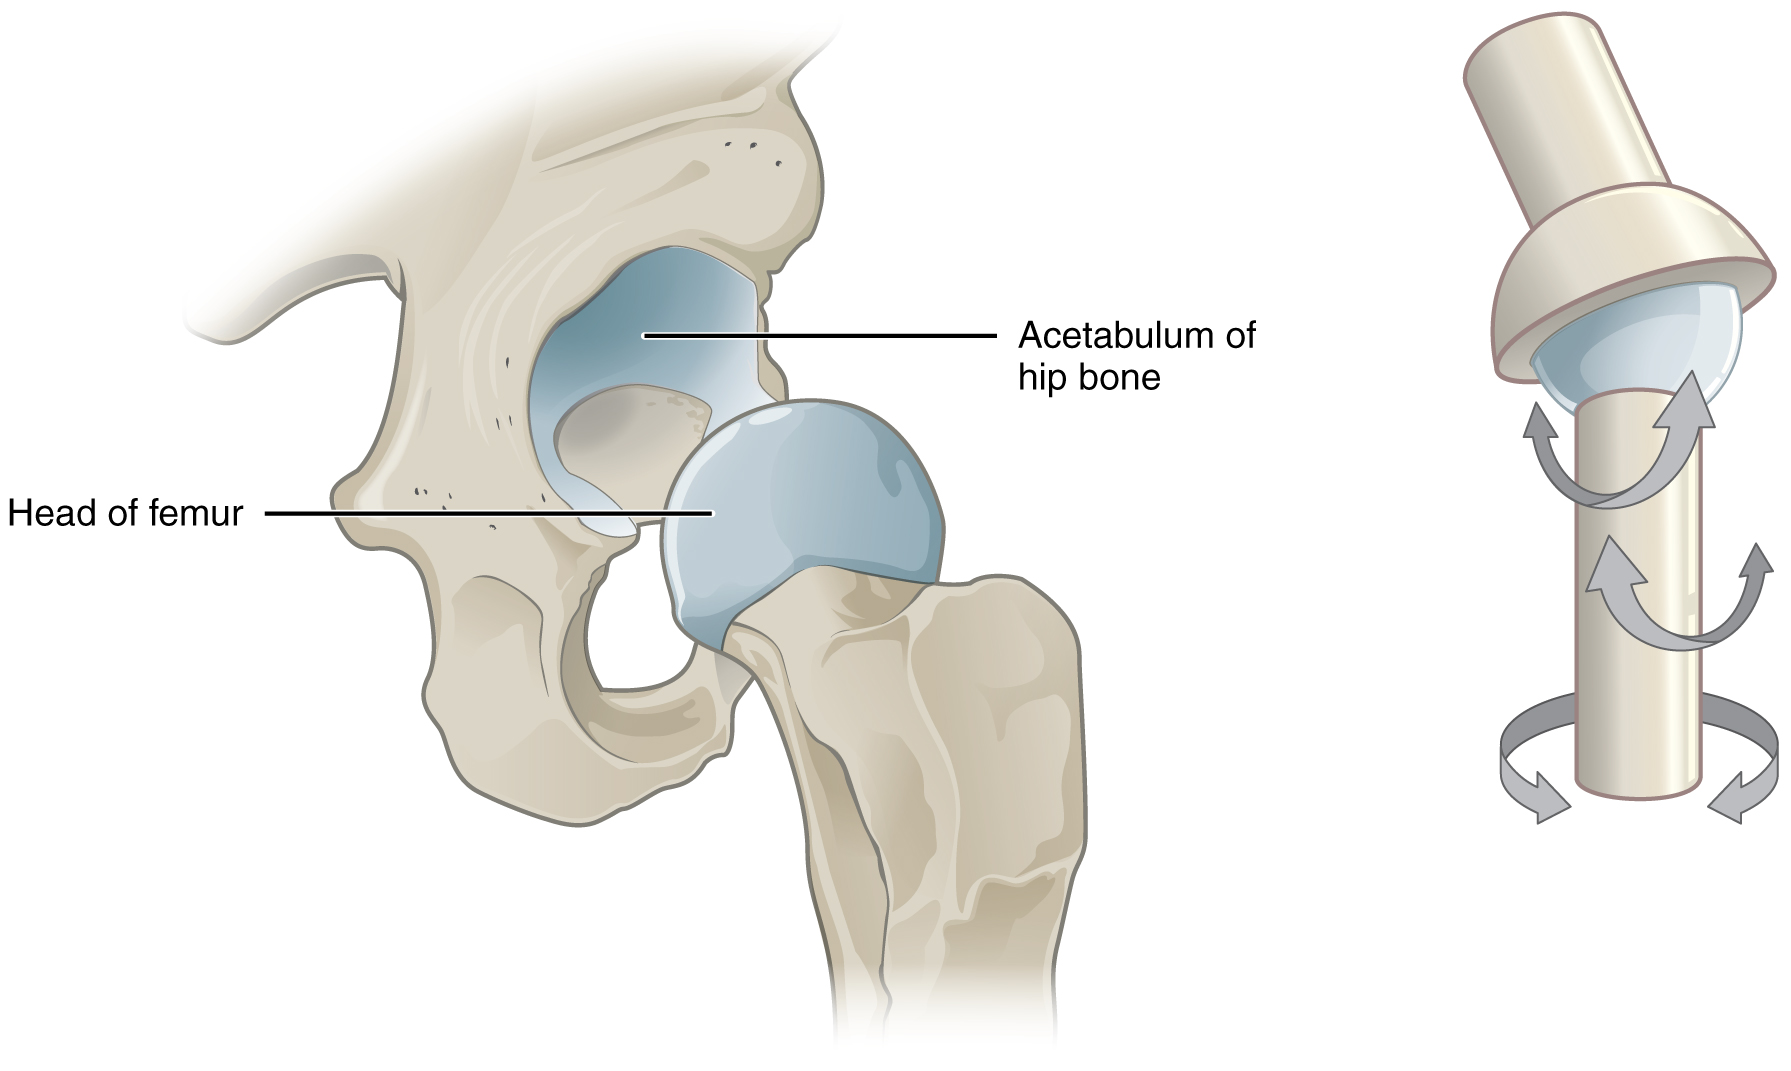 This image shows a multiaxial joint. The left panel shows the